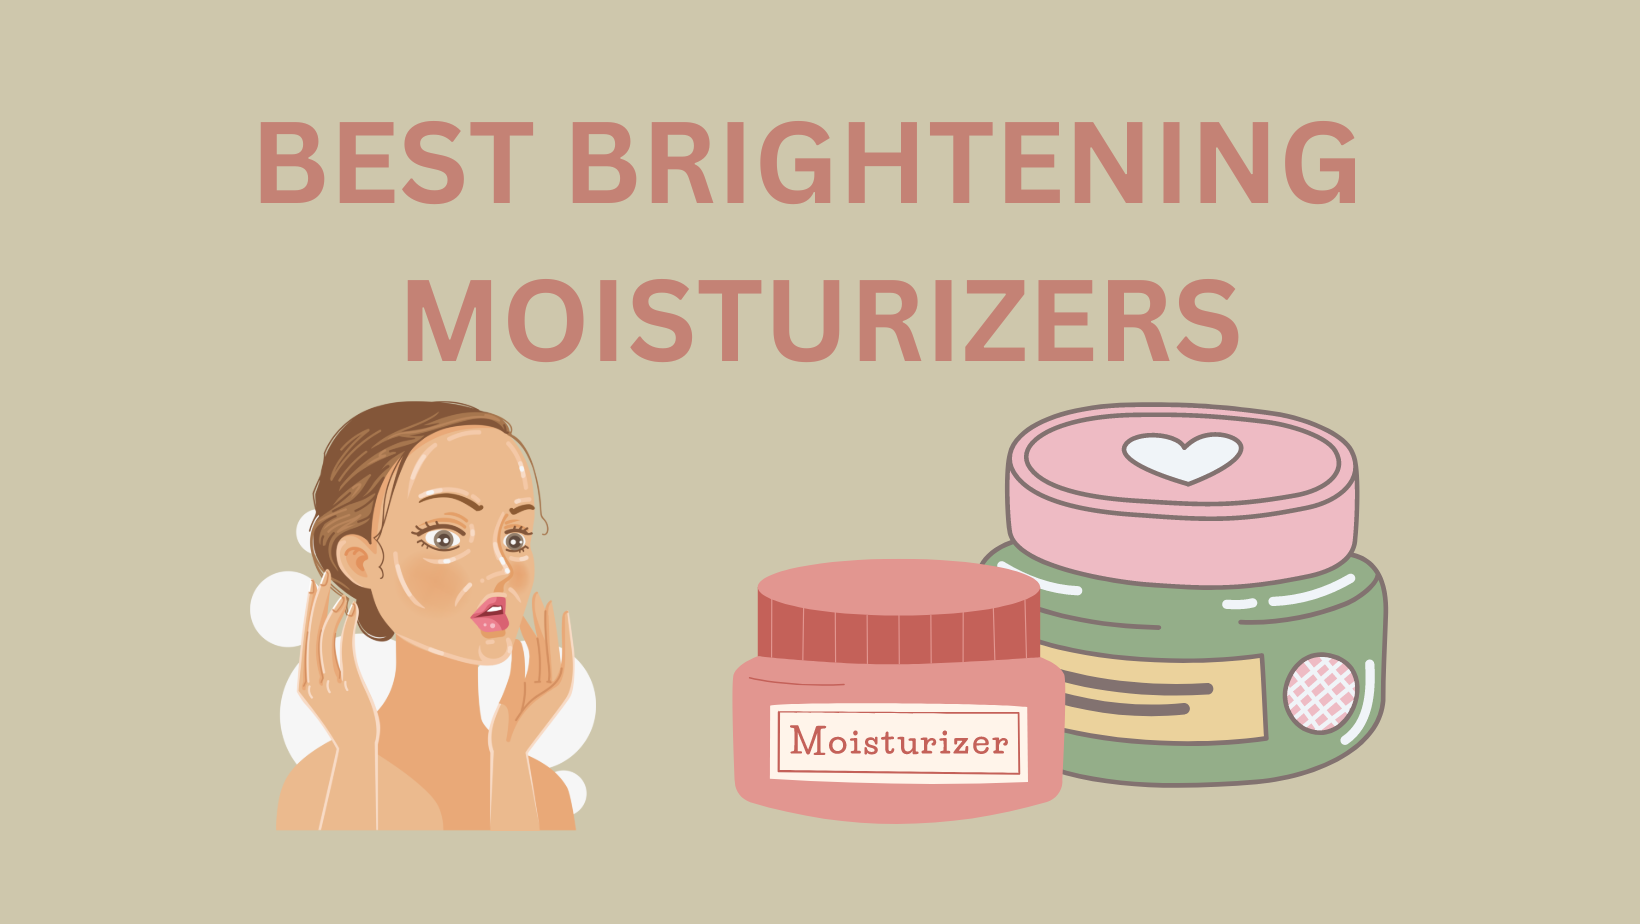 Top 10 Brightening Moisturizers for Glowing Skin